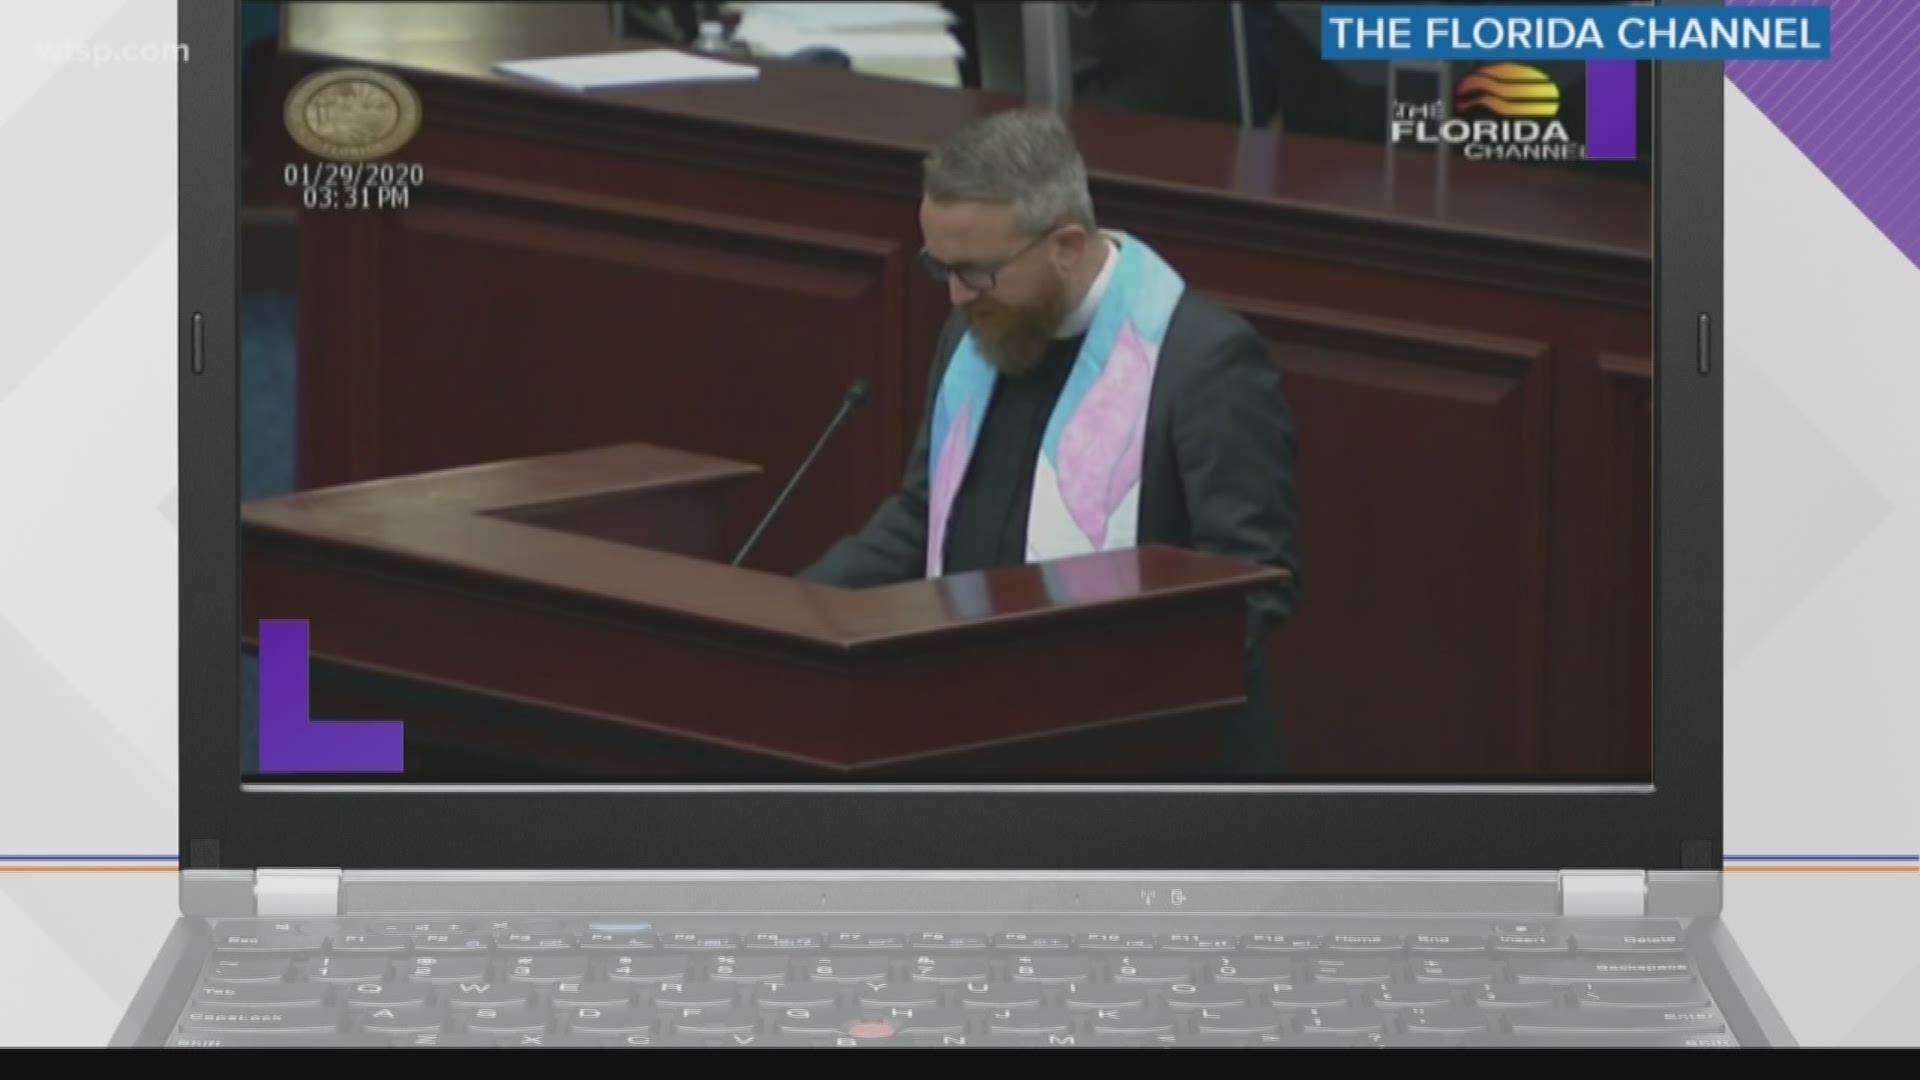 A Tampa Bay-area pastor ruffled more than a few feathers Wednesday when he delivered this invocation to the Florida House of Representatives.